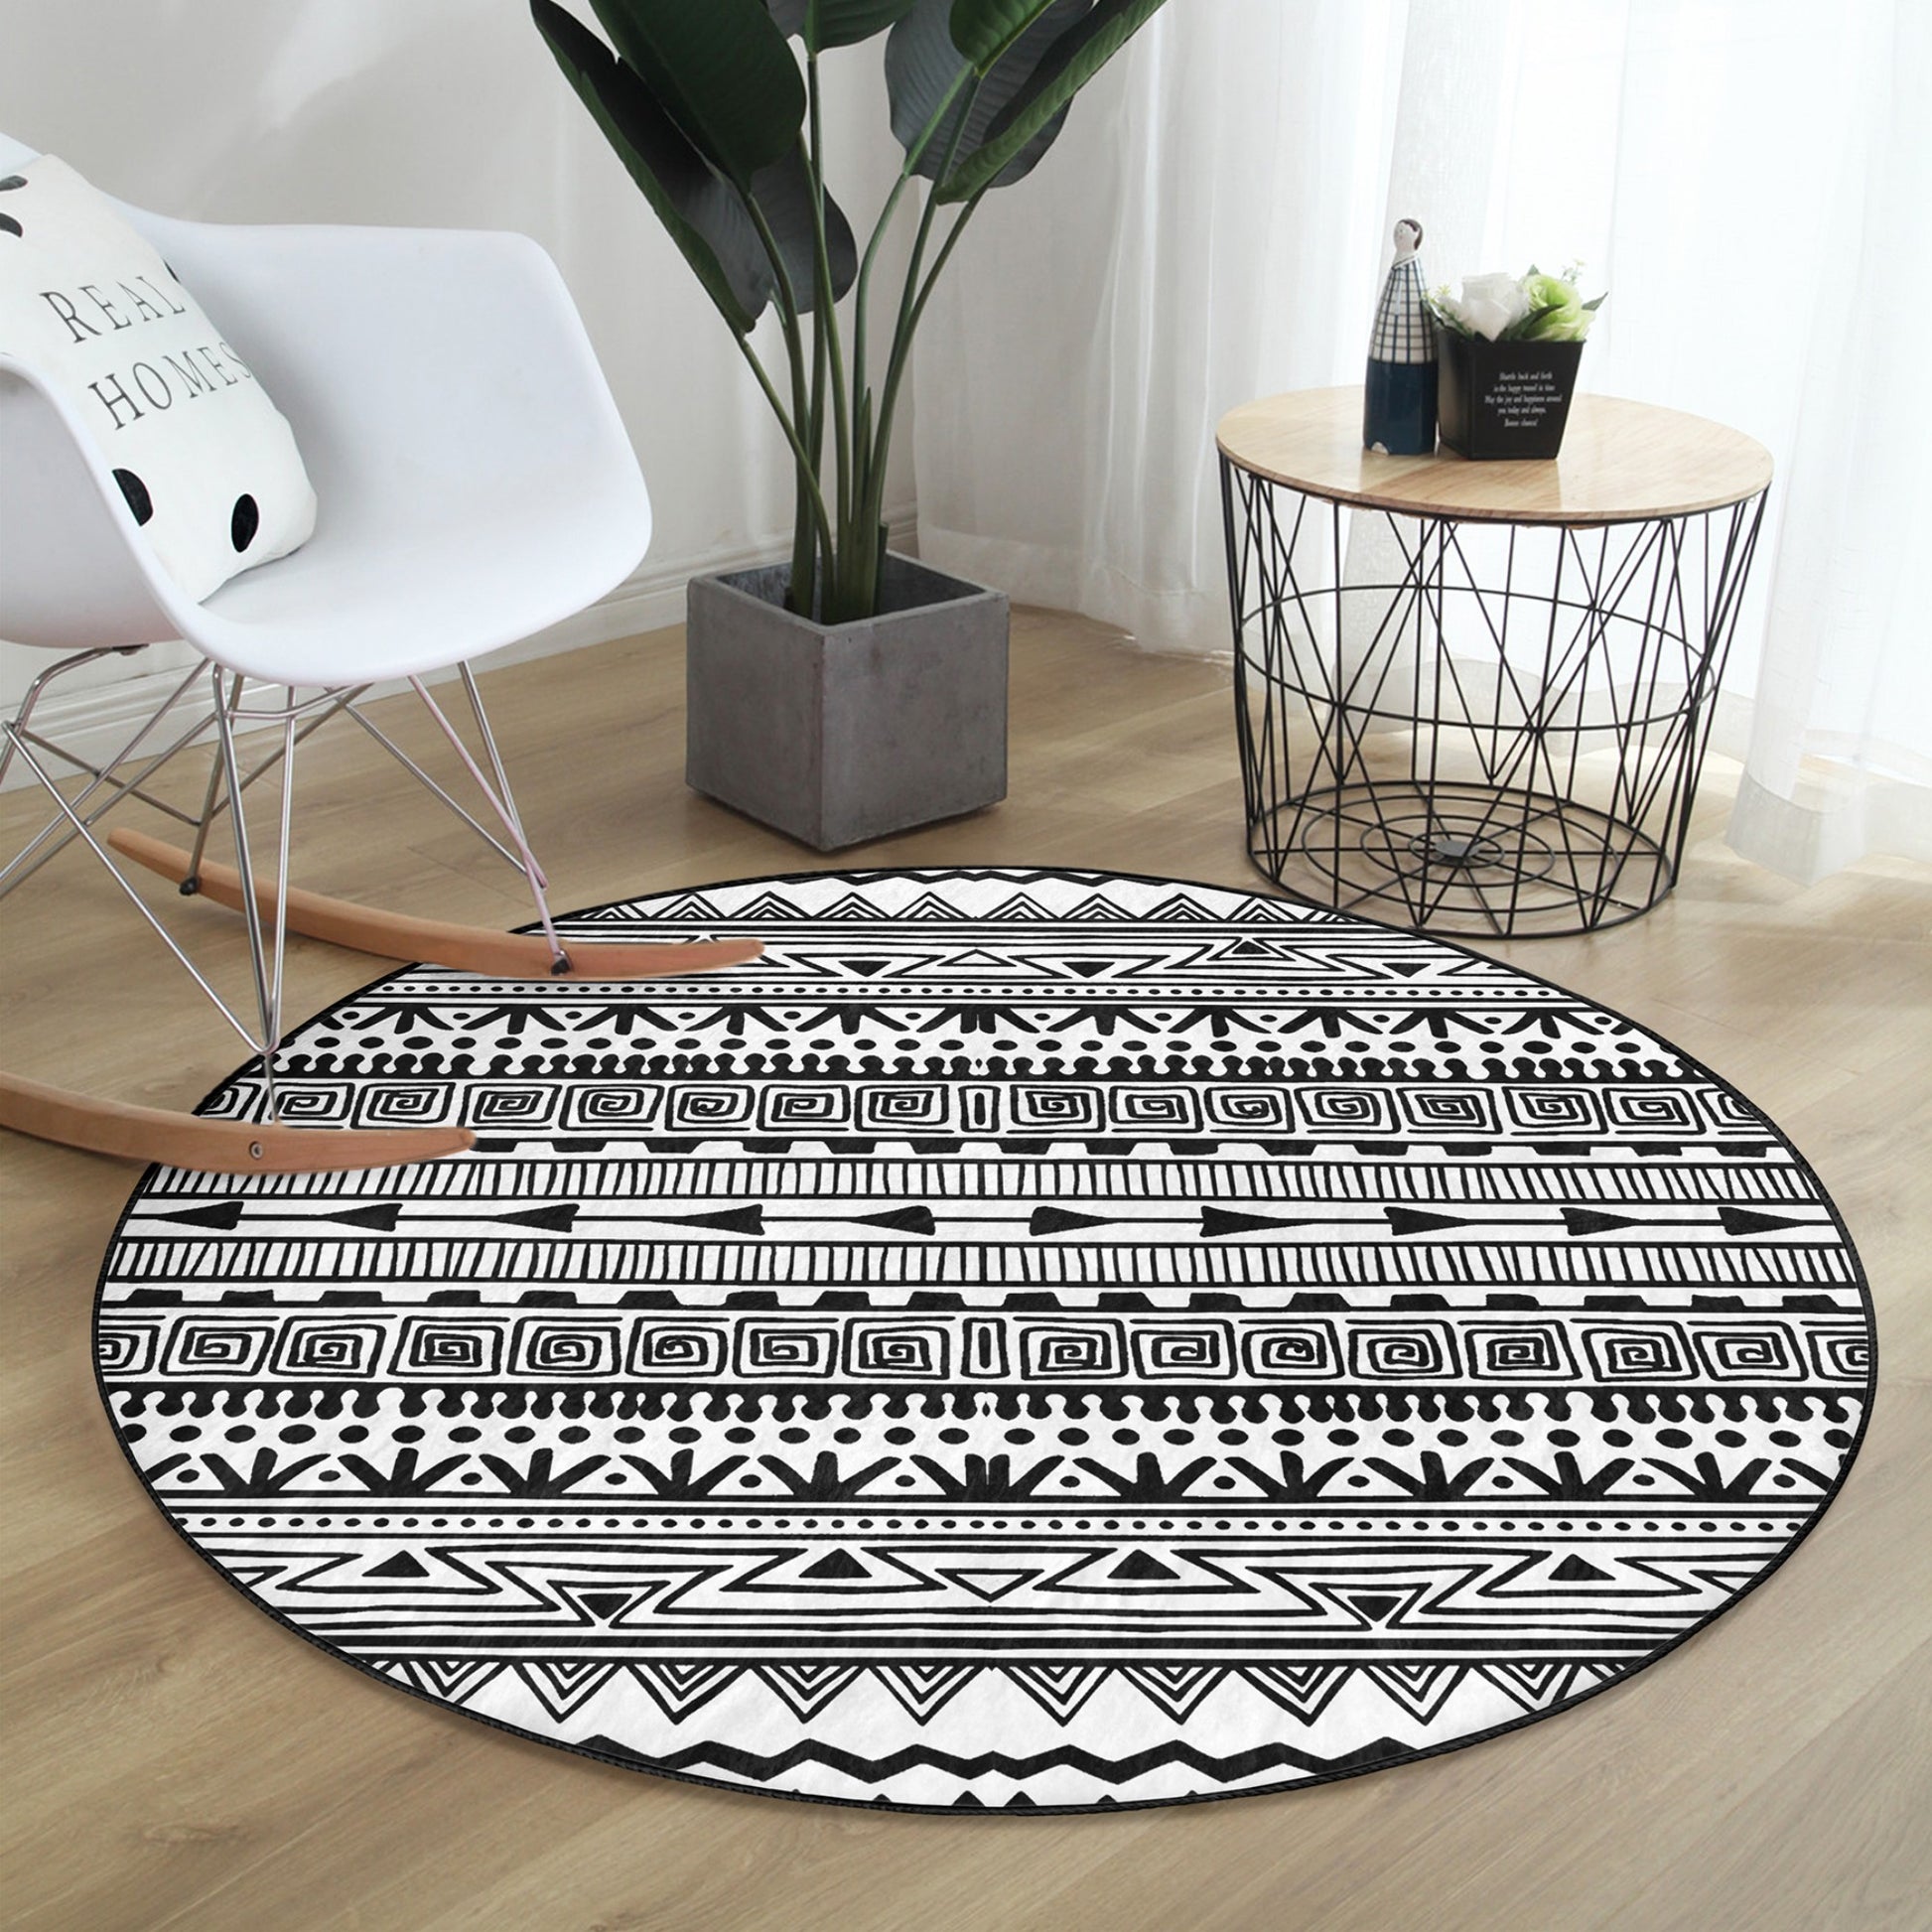 Round Patterned Floor Rug - Cultural Ambiance Accent